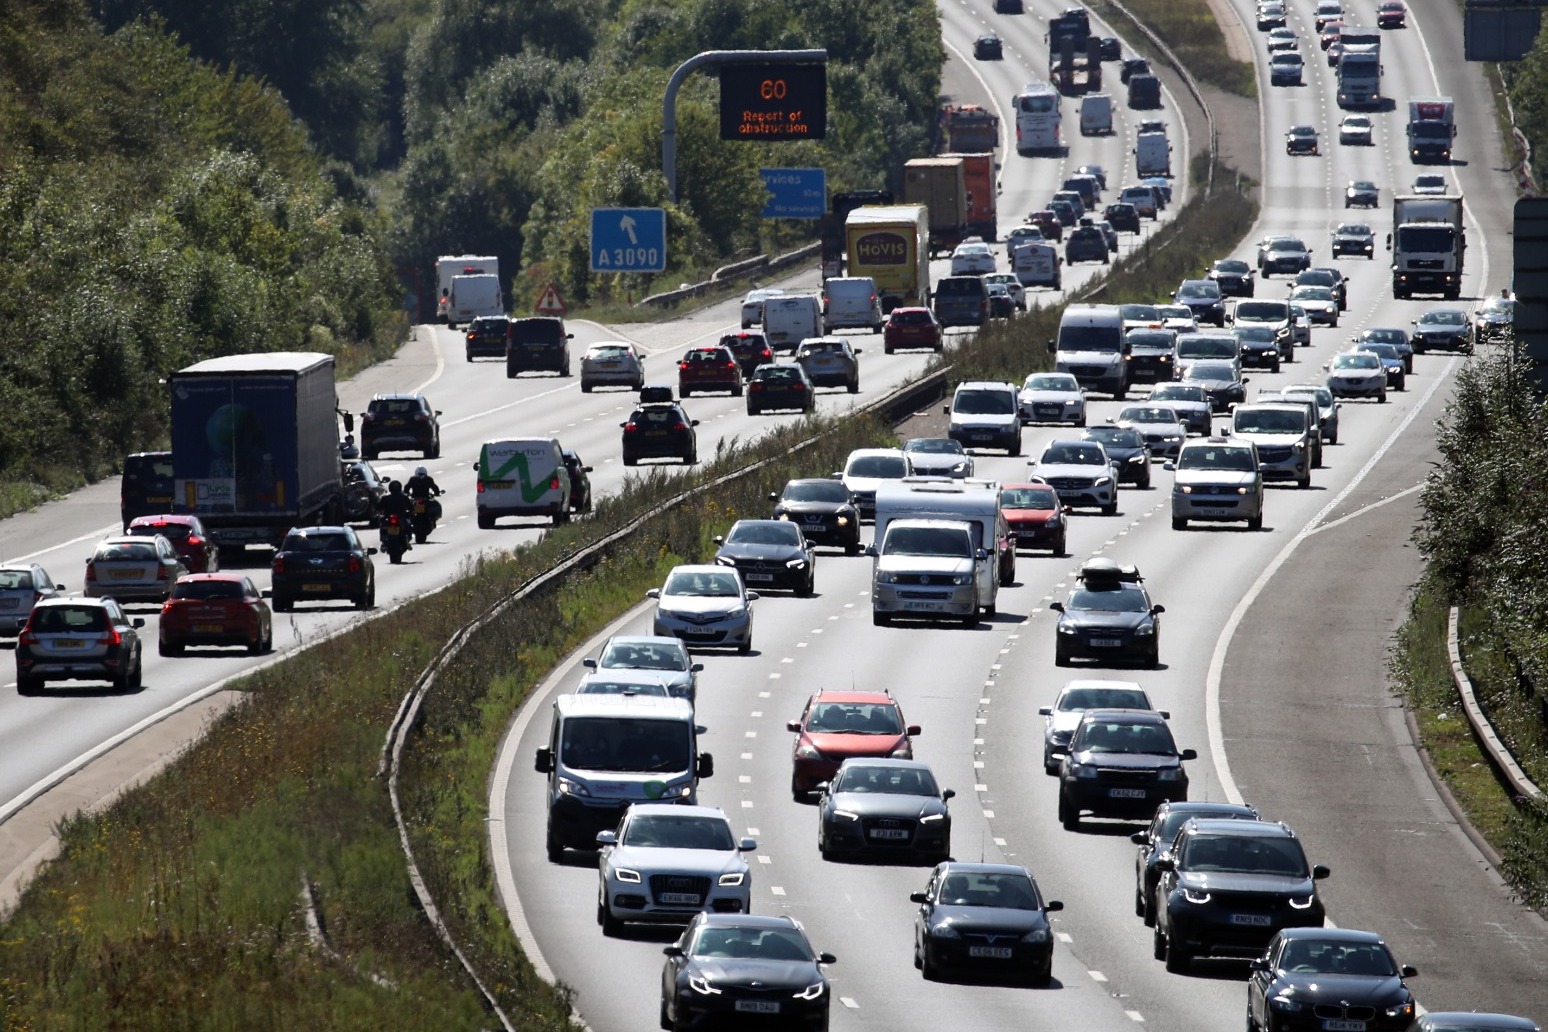 Drivers warned over busiest summer getaway in at least eight years 